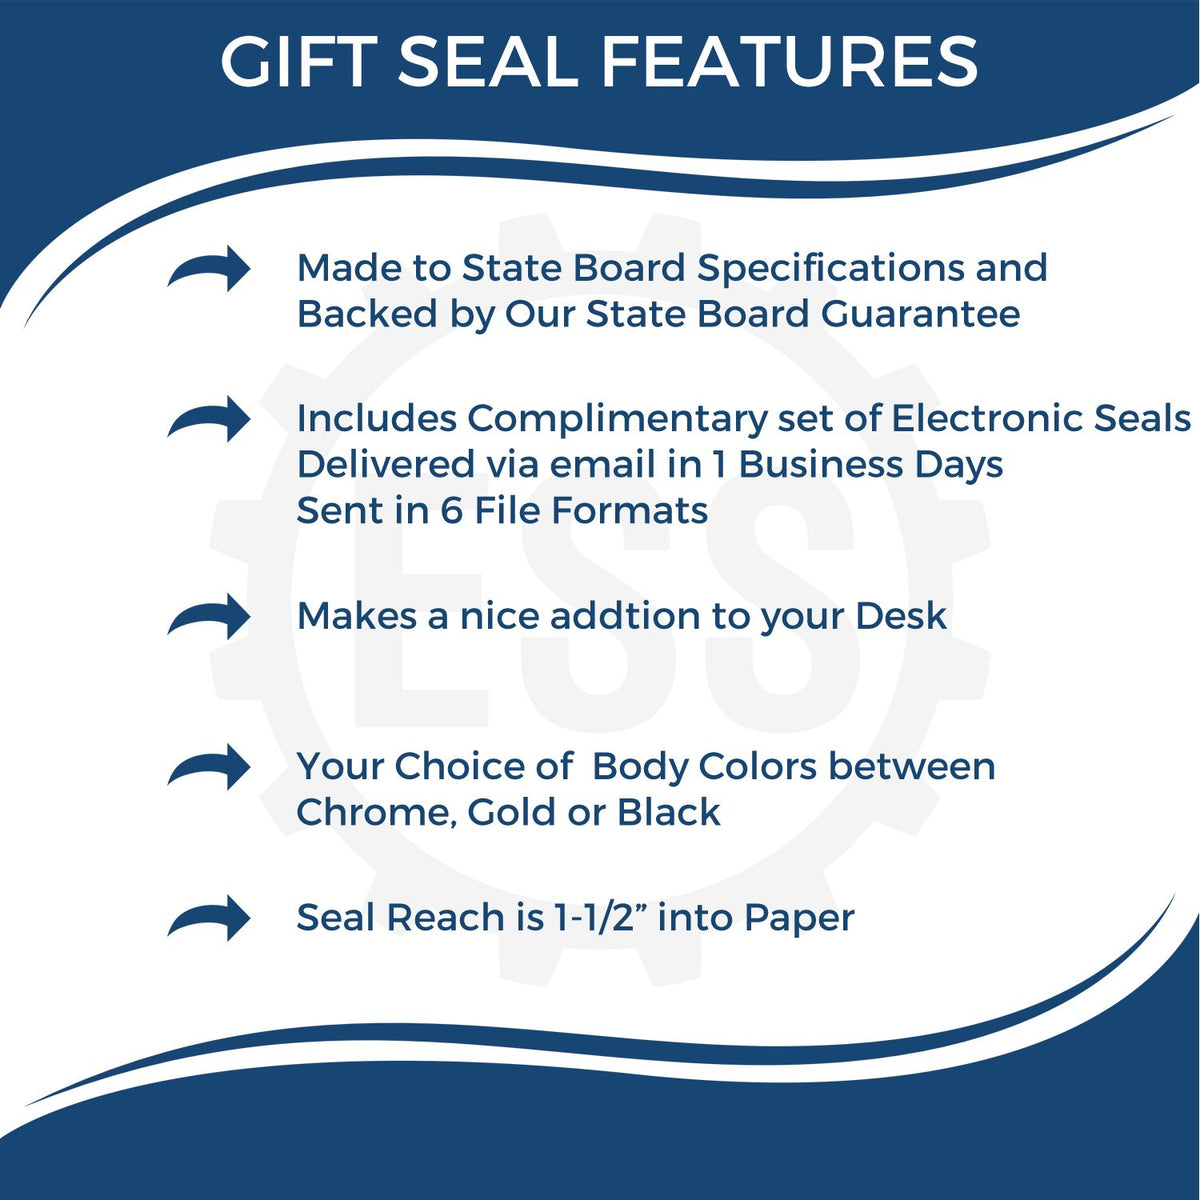 A picture of an infographic highlighting the selling points for the Gift Indiana Land Surveyor Seal